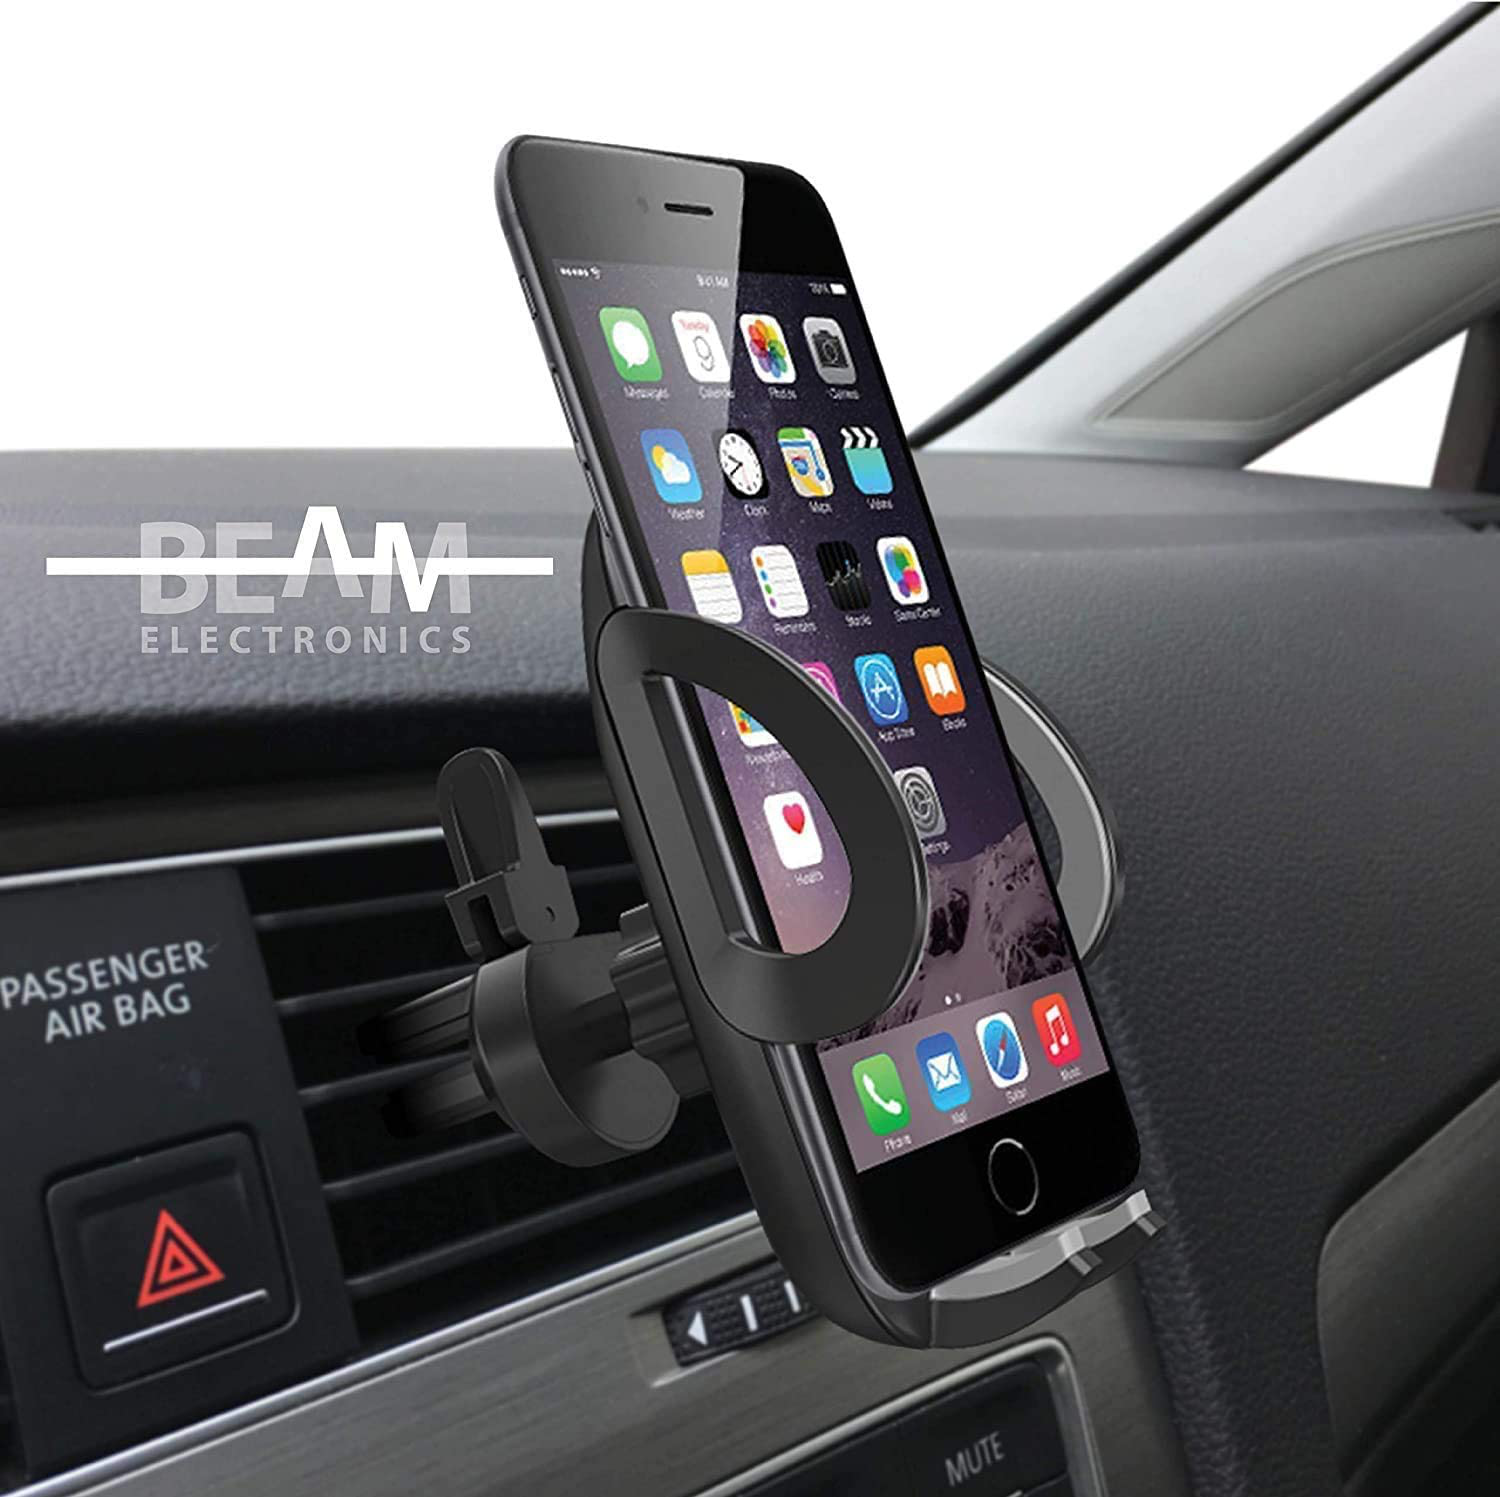 Beam Electronics Car Phone Mount Holder Universal Phone Car Air Vent Mount Holder Cradle Compatible for iPhone 12 11 Pro Max XS XS XR X 8+ 7+ SE 6s 6+ 5s 4 Samsung Galaxy S4-S10 LG Nexus Nokia